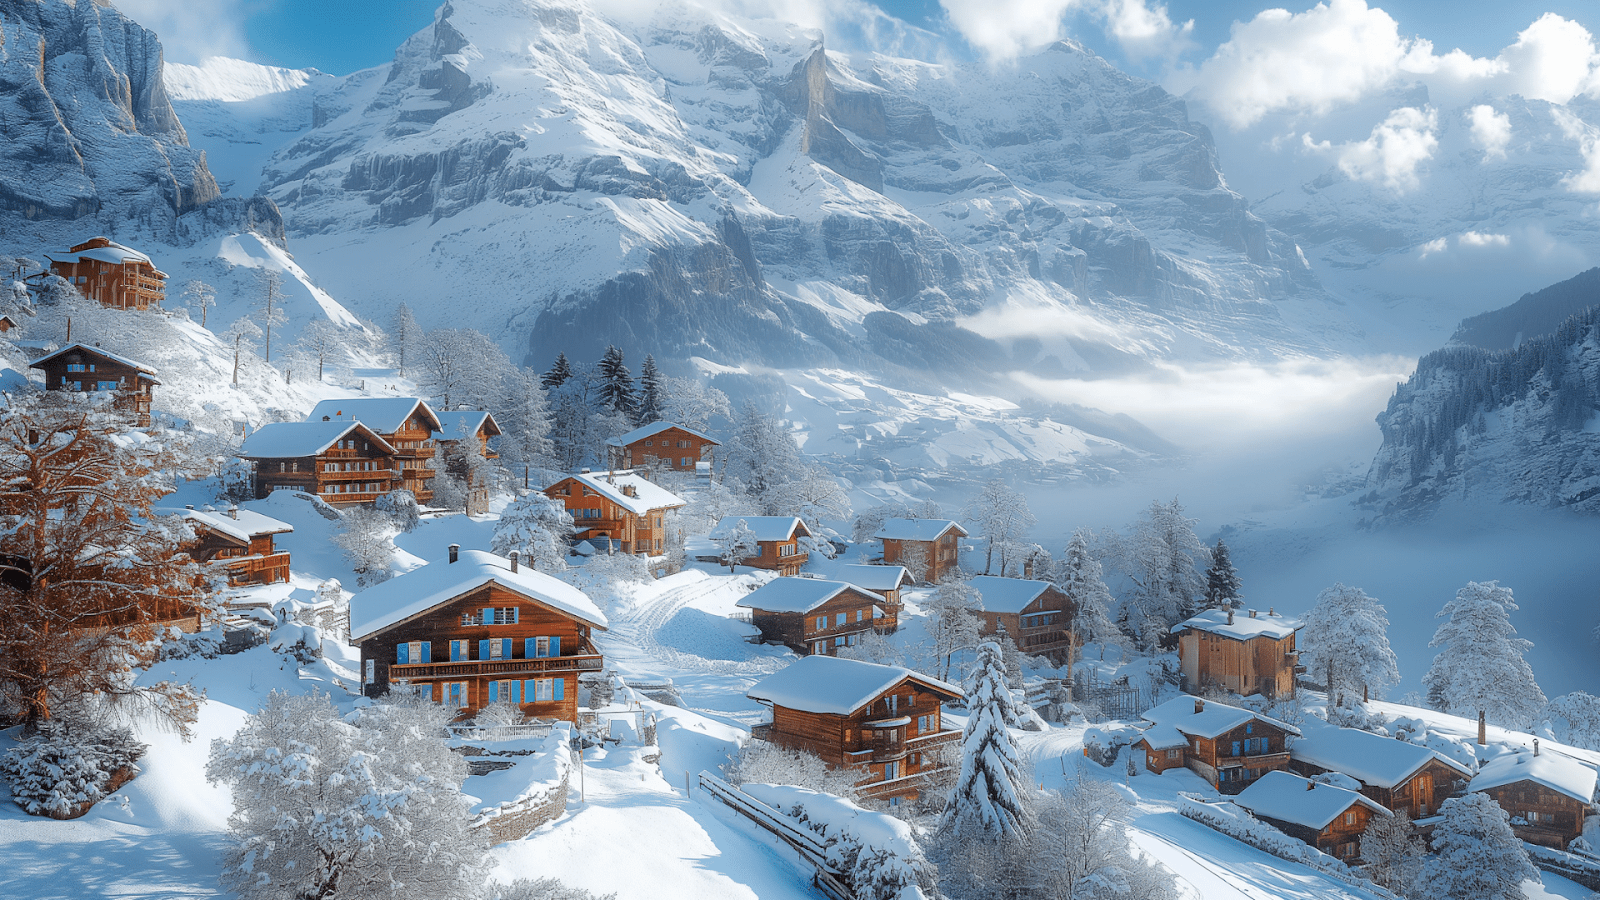 Snowy Alpine village, perfect for where to travel in Europe for winter wonderland escapes